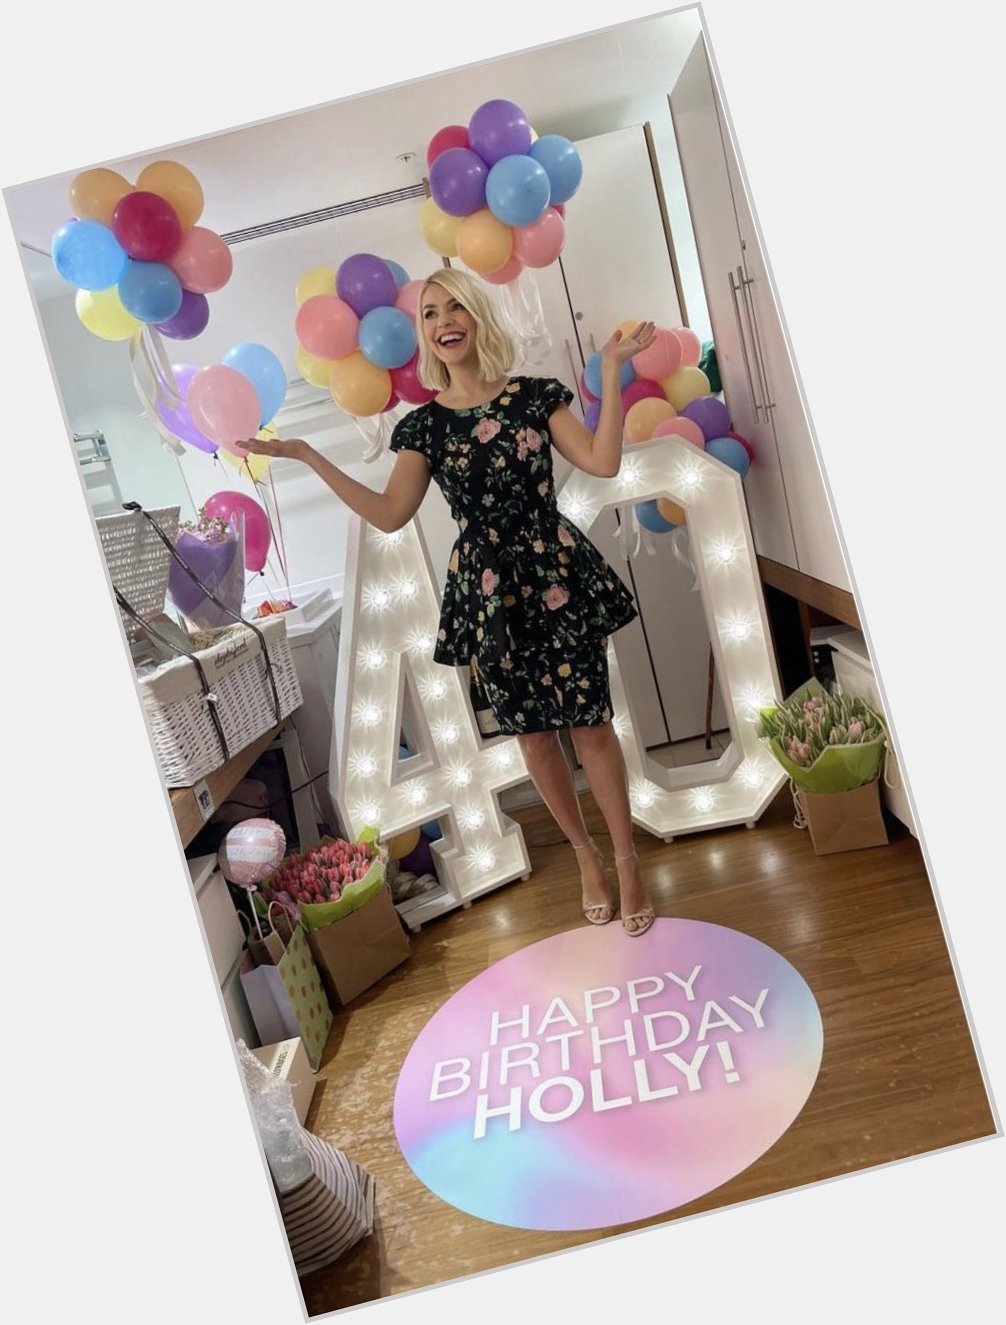 Happy Birthday Holly Willoughby       absolutely beautiful  